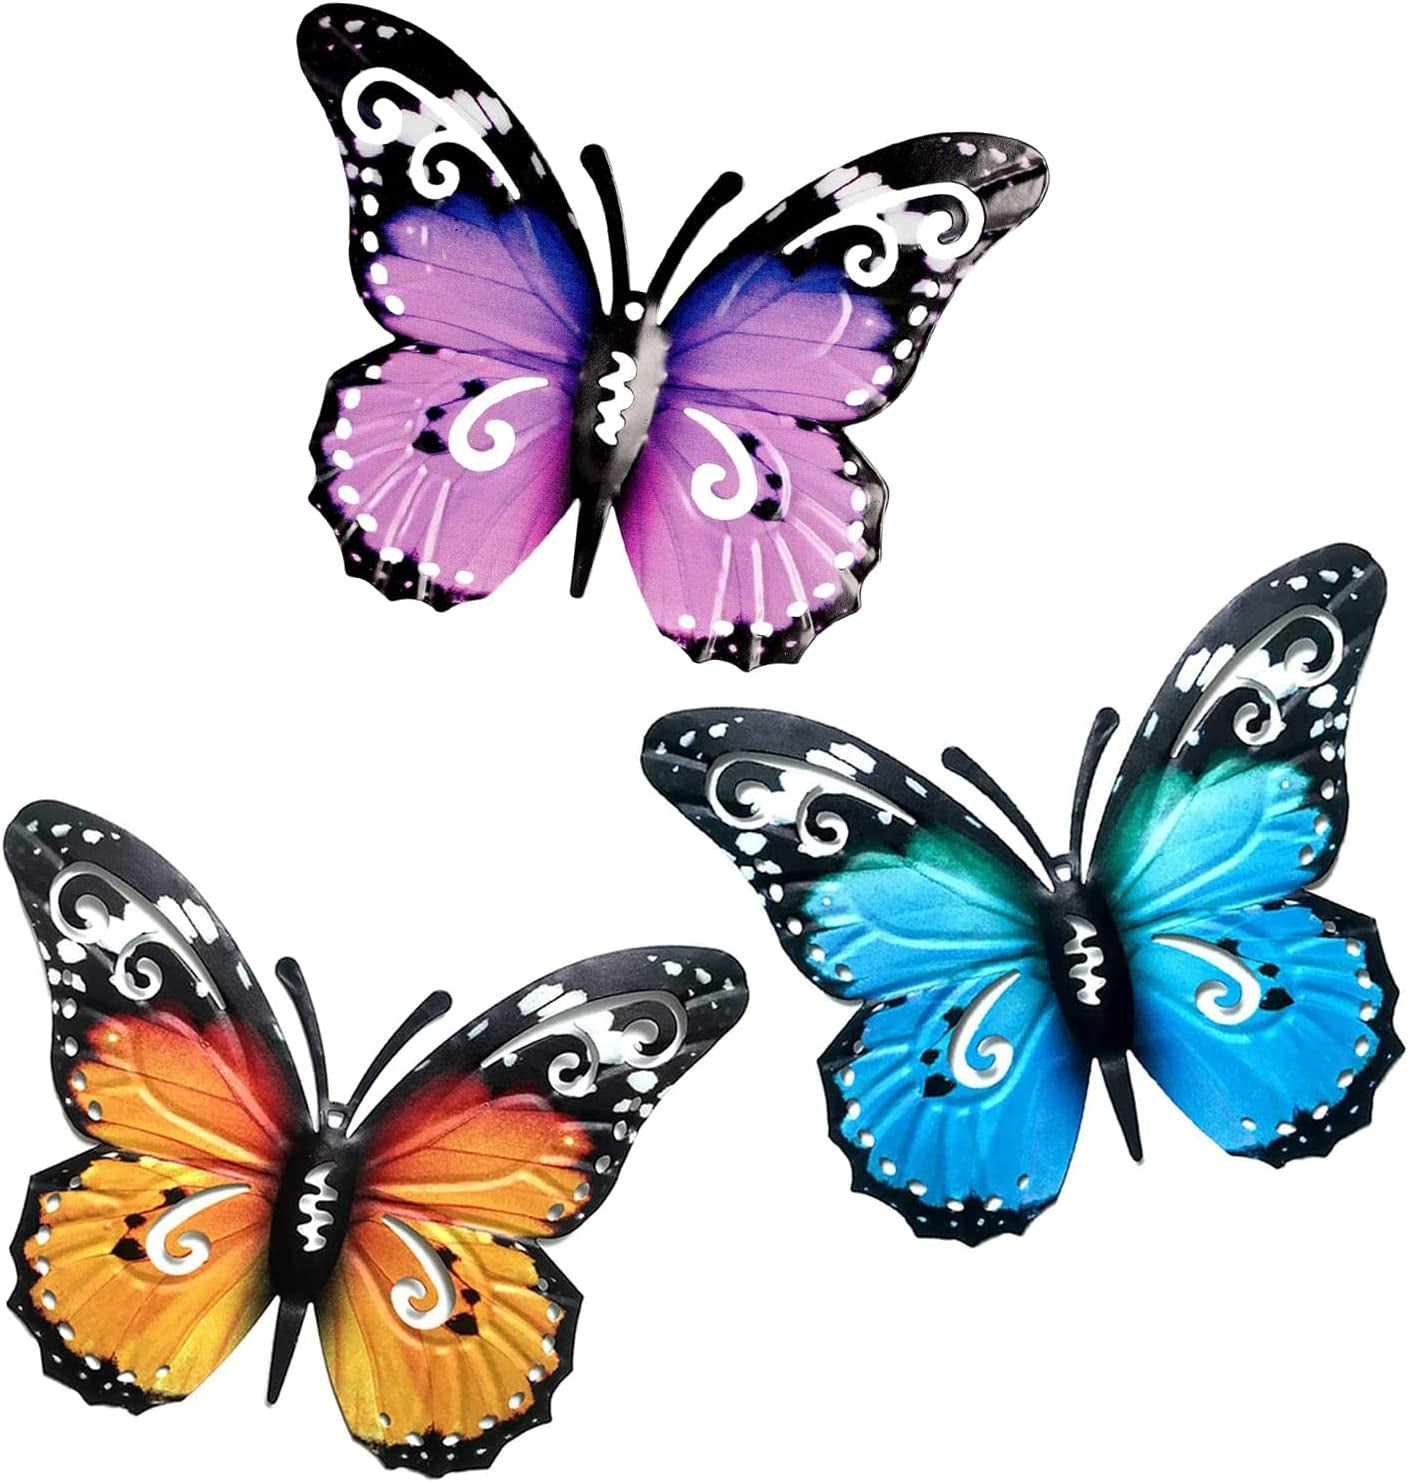 TGAHTMI, Garden Butterfly Ornaments Large Metal Garden Fence Decorations Butterfly Wall Art Decorations Outdoor Decor for Home Yard, Fence, Garden,Sheds Hanging (Blue + Yellow+Purple)